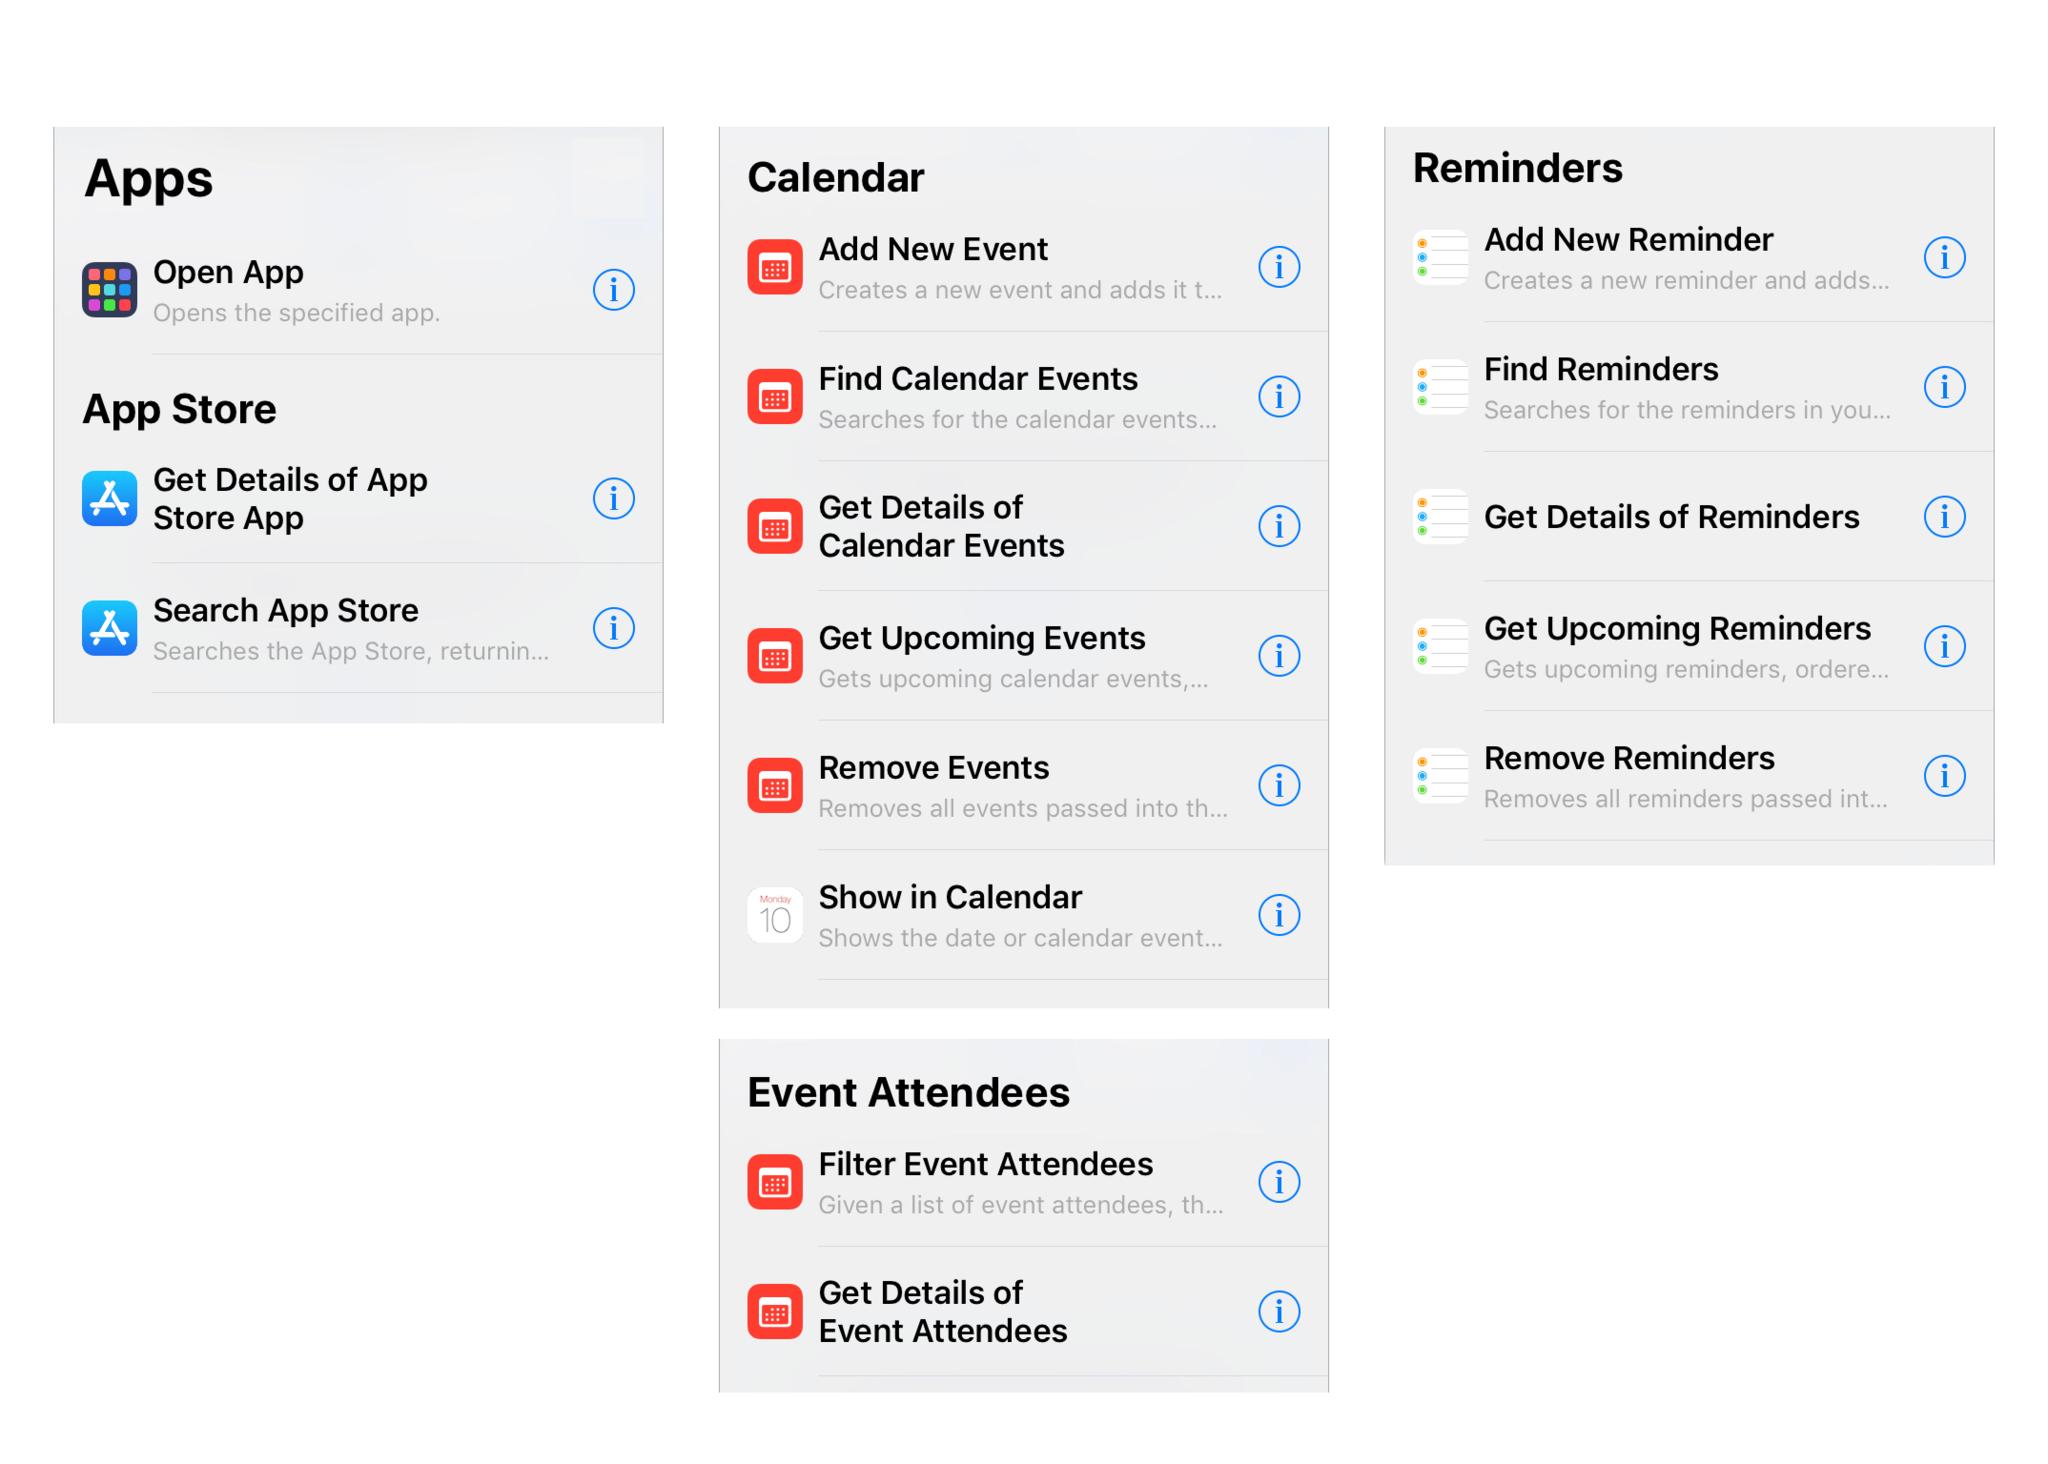 Image showing clipped screenshots of Shortcuts actions, including the Apps, Calendar, Event Attendees, and Reminders categories.